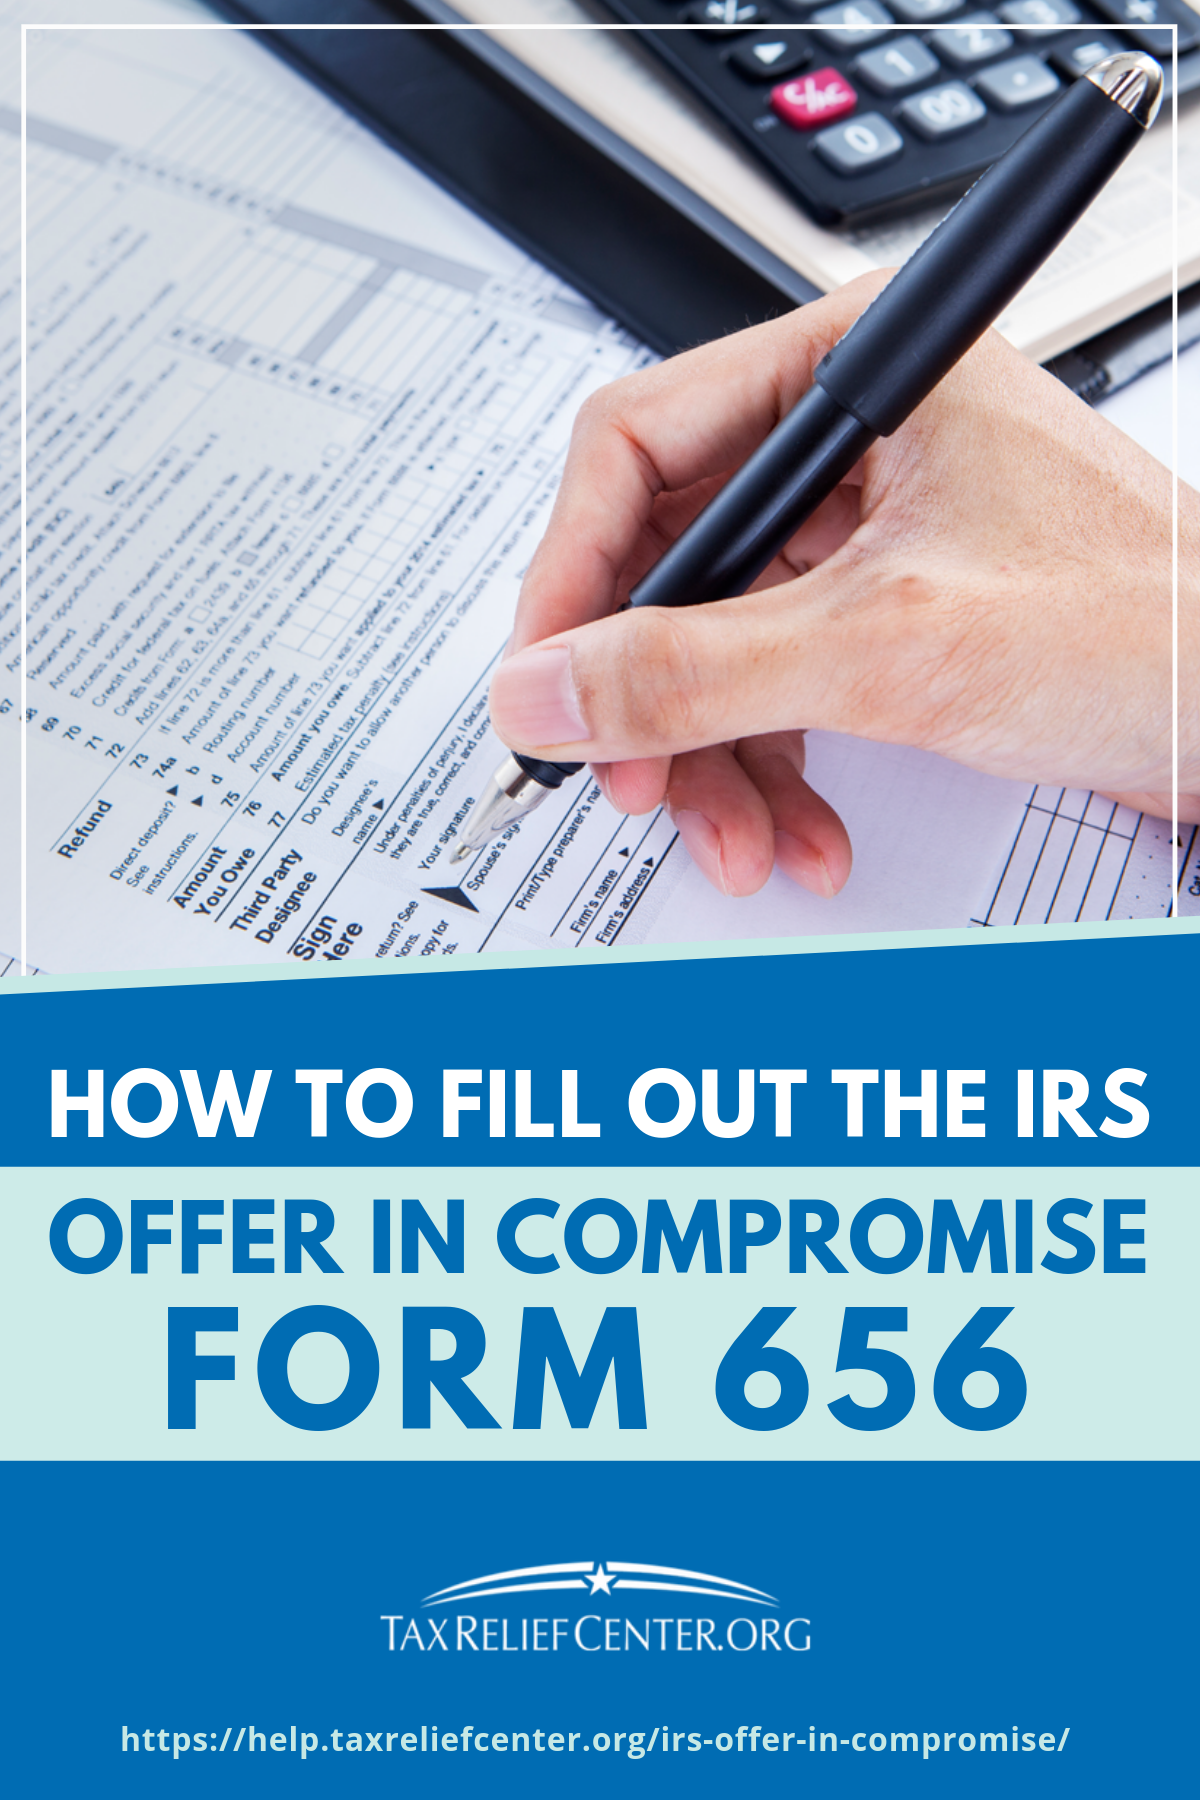 How To Fill Out The IRS Offer In Compromise Form 656 https://help.taxreliefcenter.org/irs-offer-in-compromise/